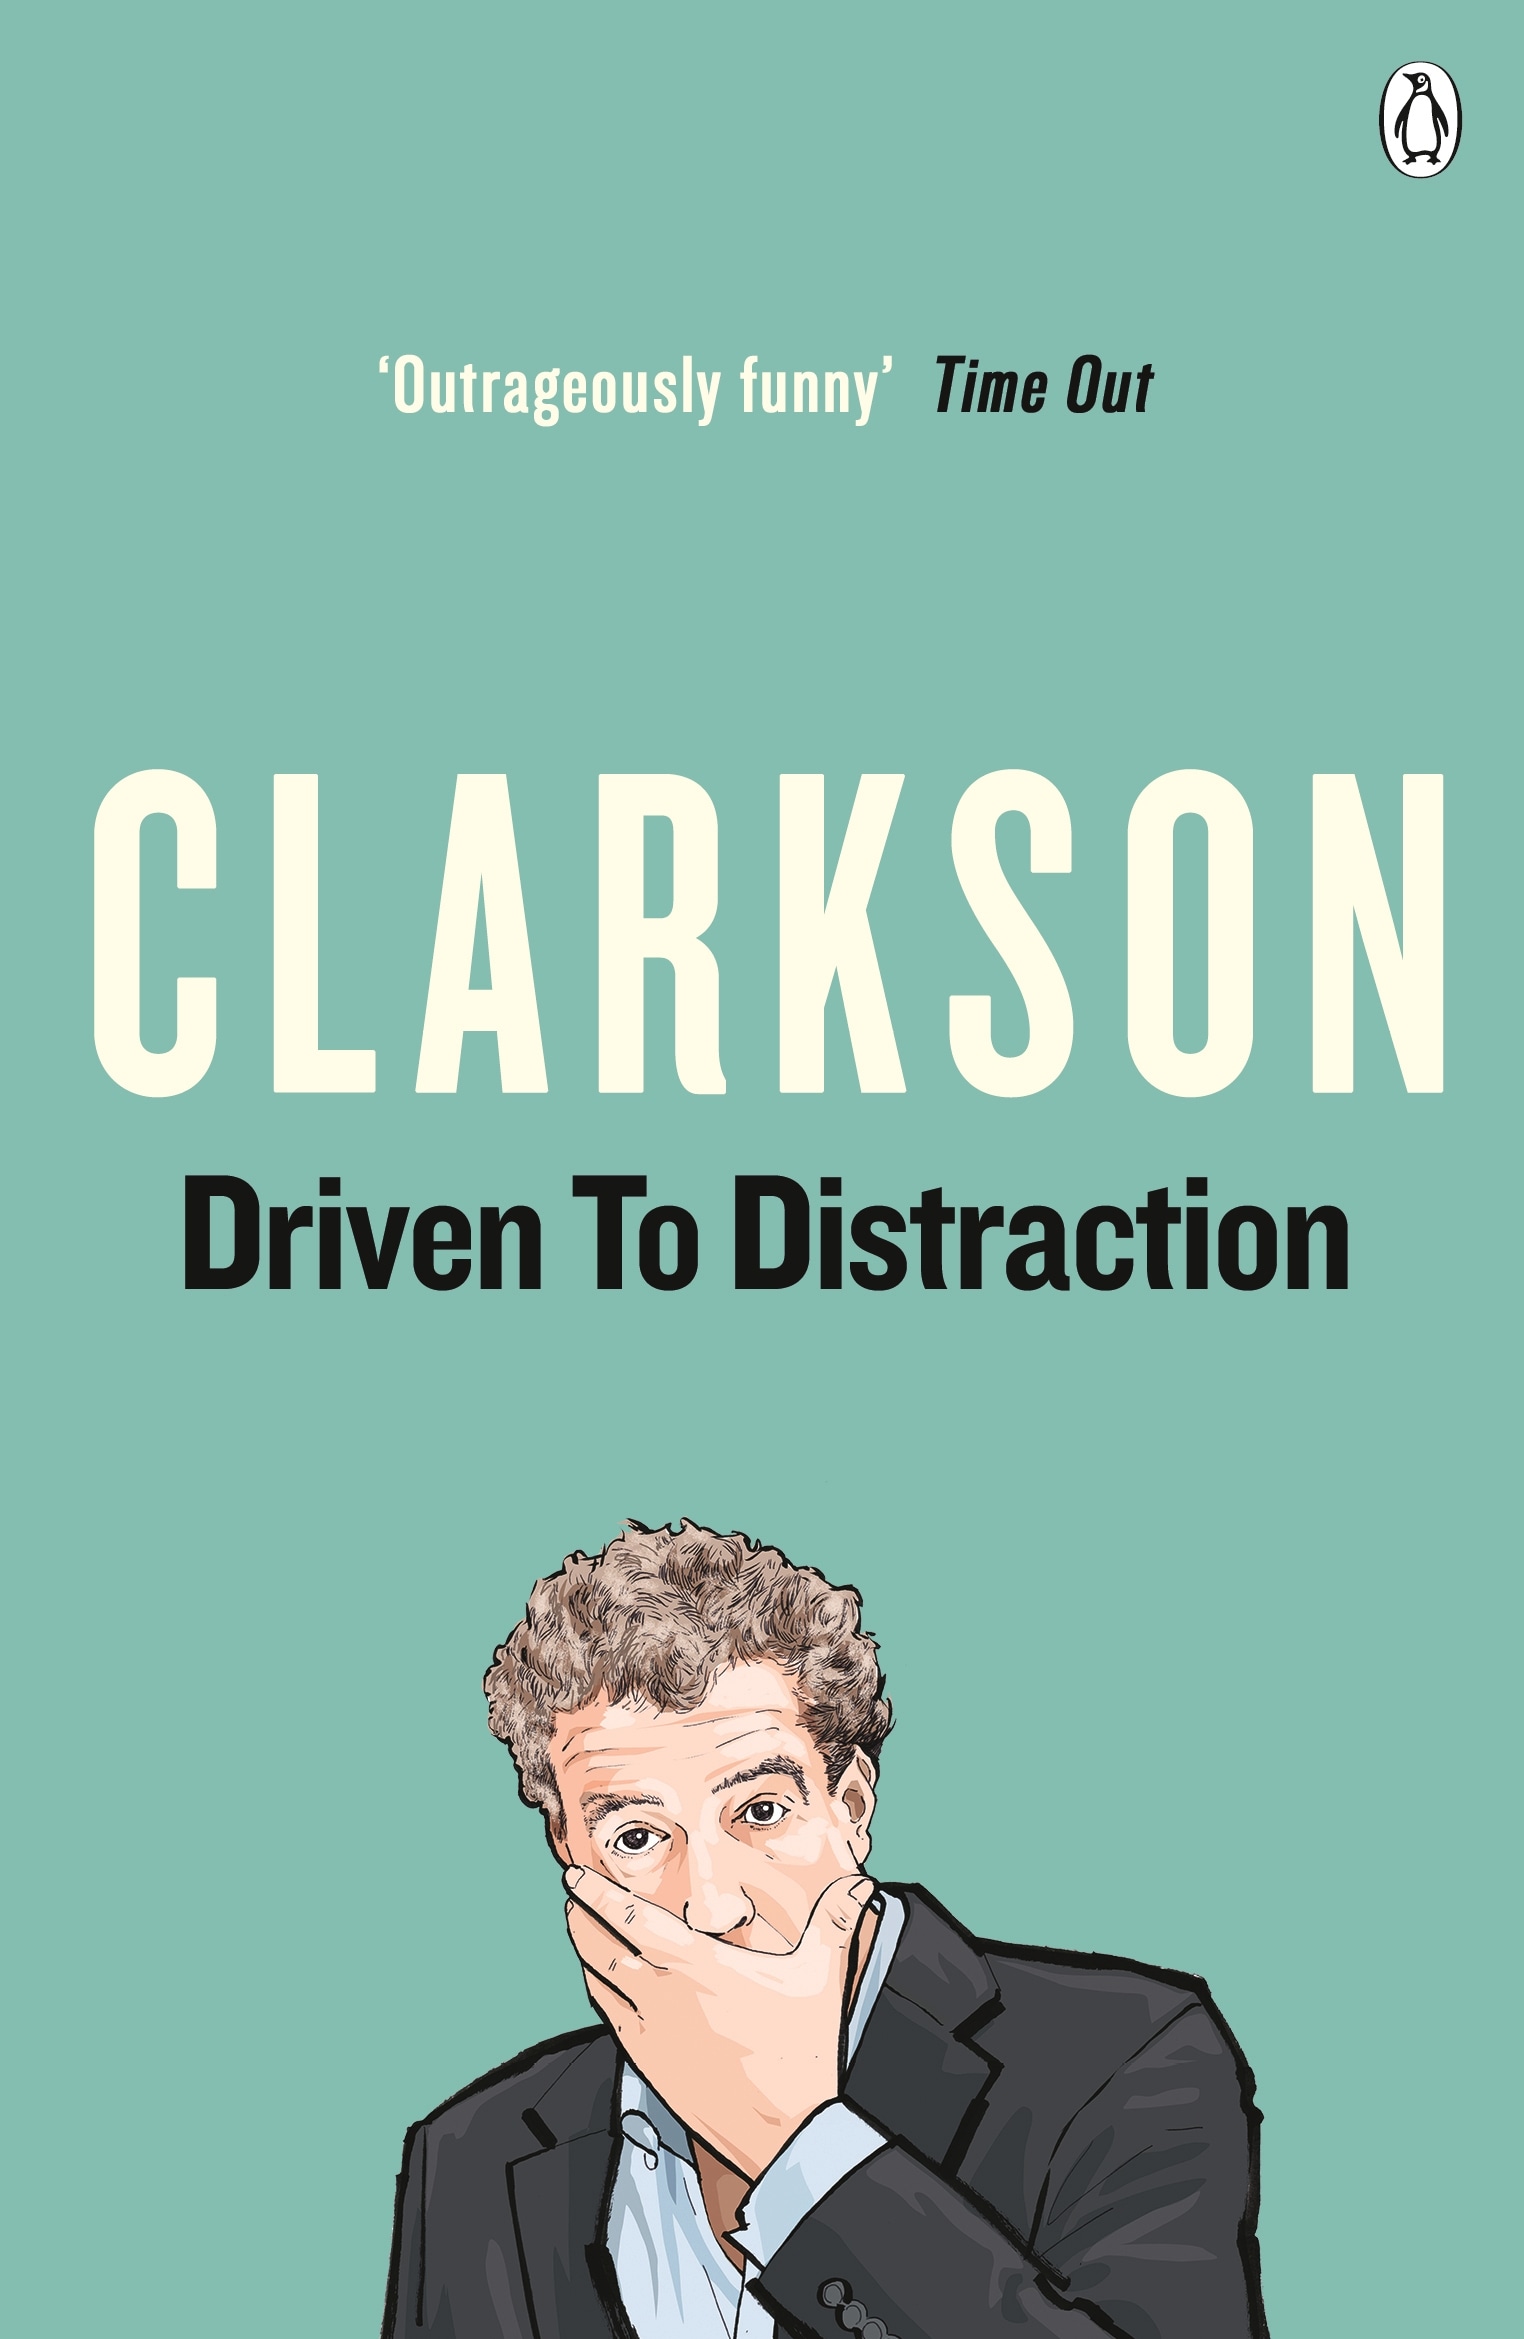 Book “Driven to Distraction” by Jeremy Clarkson